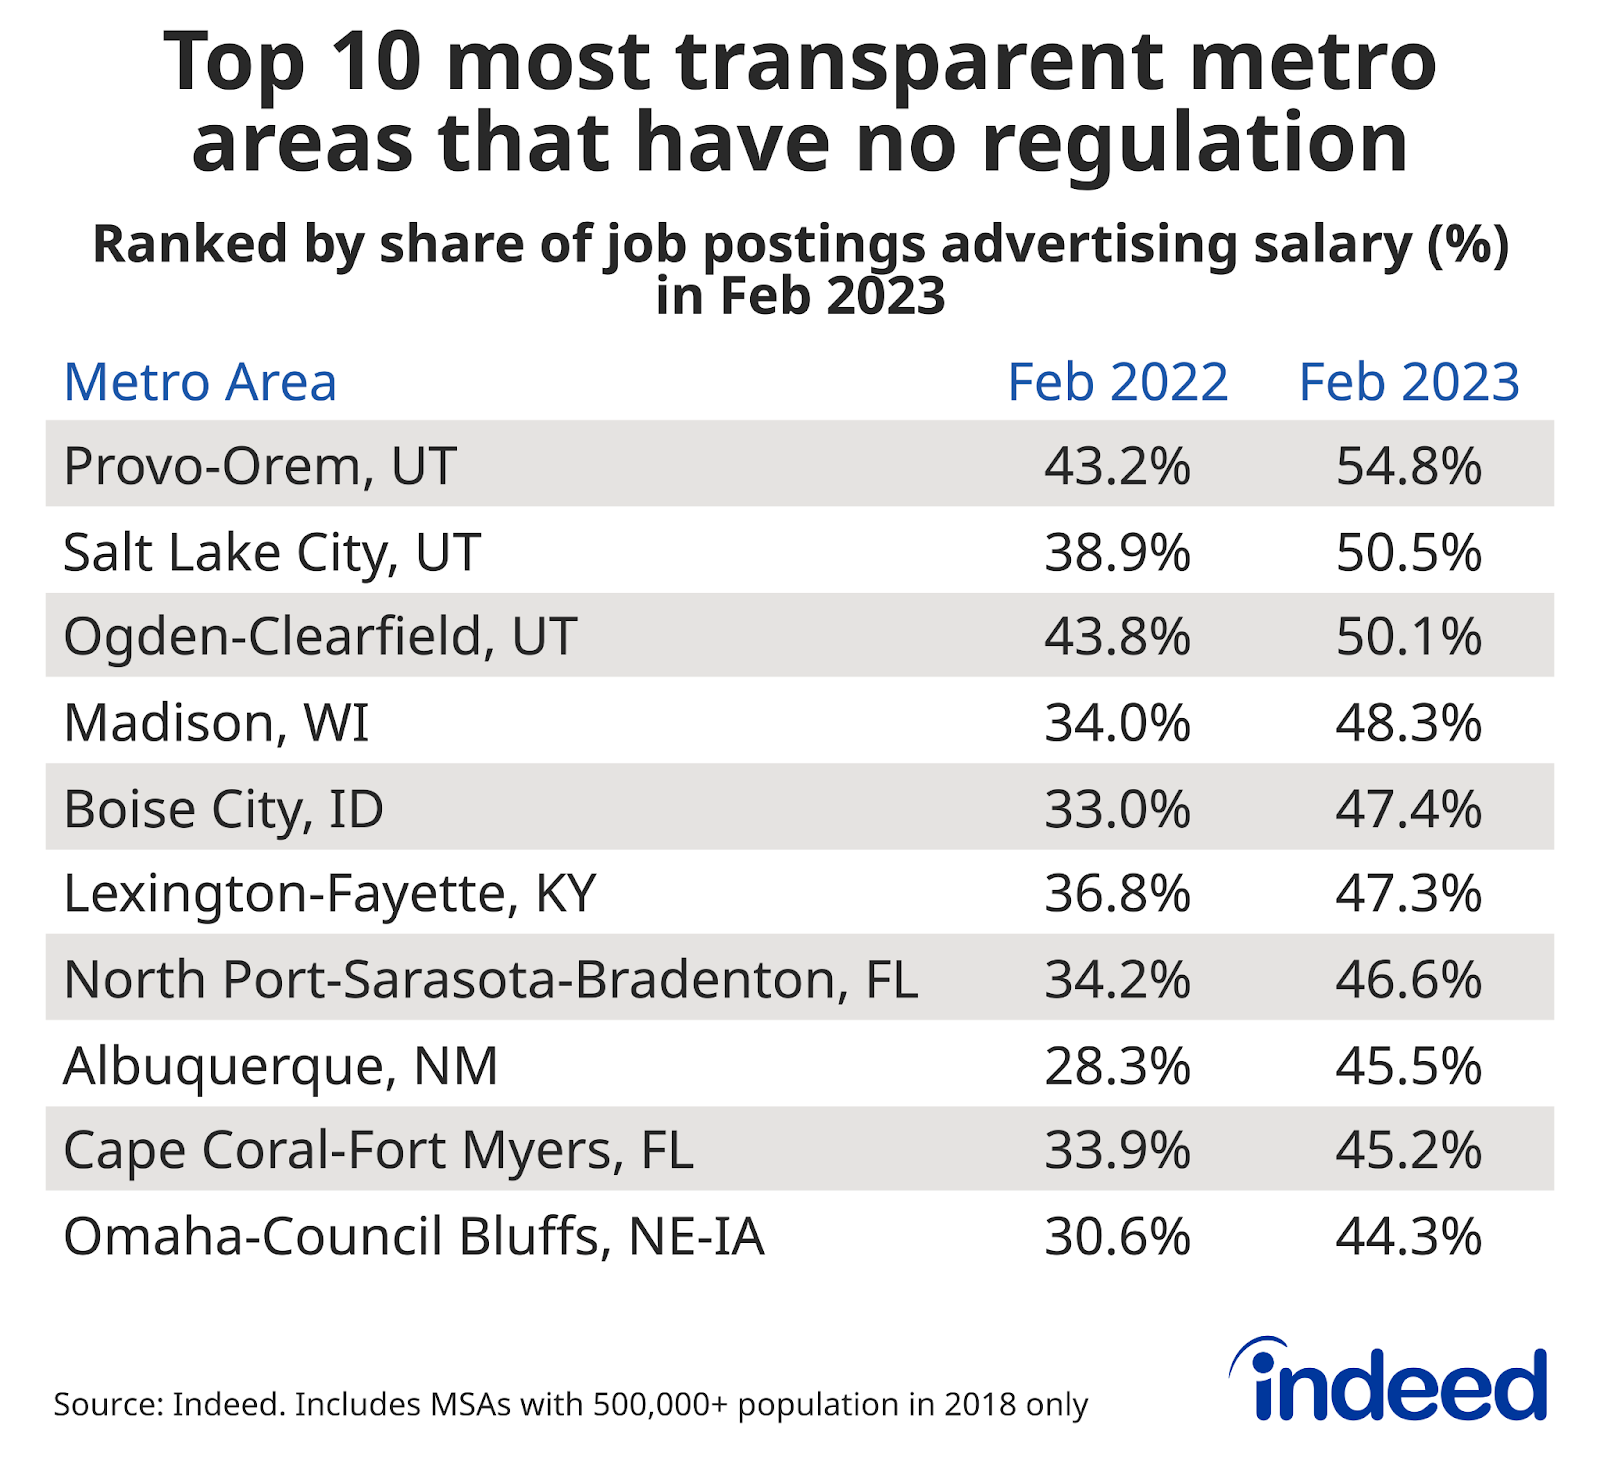 Chart titled “Top 10 most transparent metro areas that have no regulation” with columns titled “Metro Area,” “Feb 2022,” and “Feb 2023.”